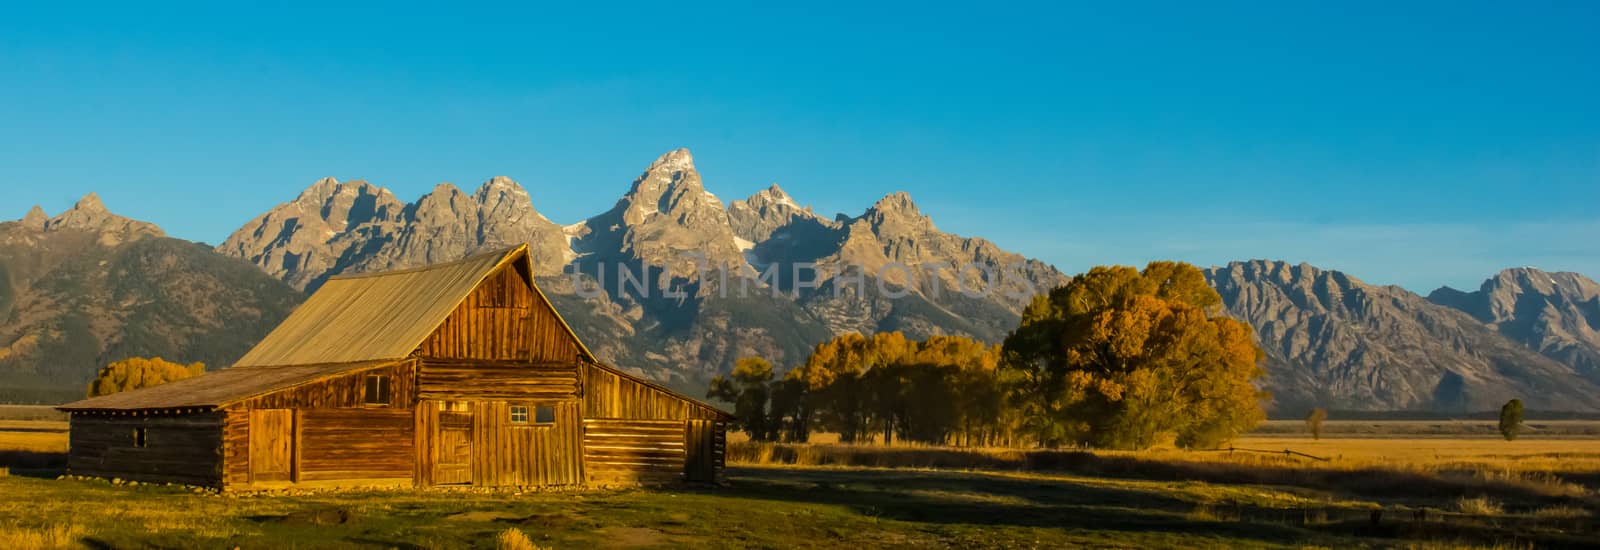 Panorama - Moulton Barn in Grand Teton National Park by cestes001